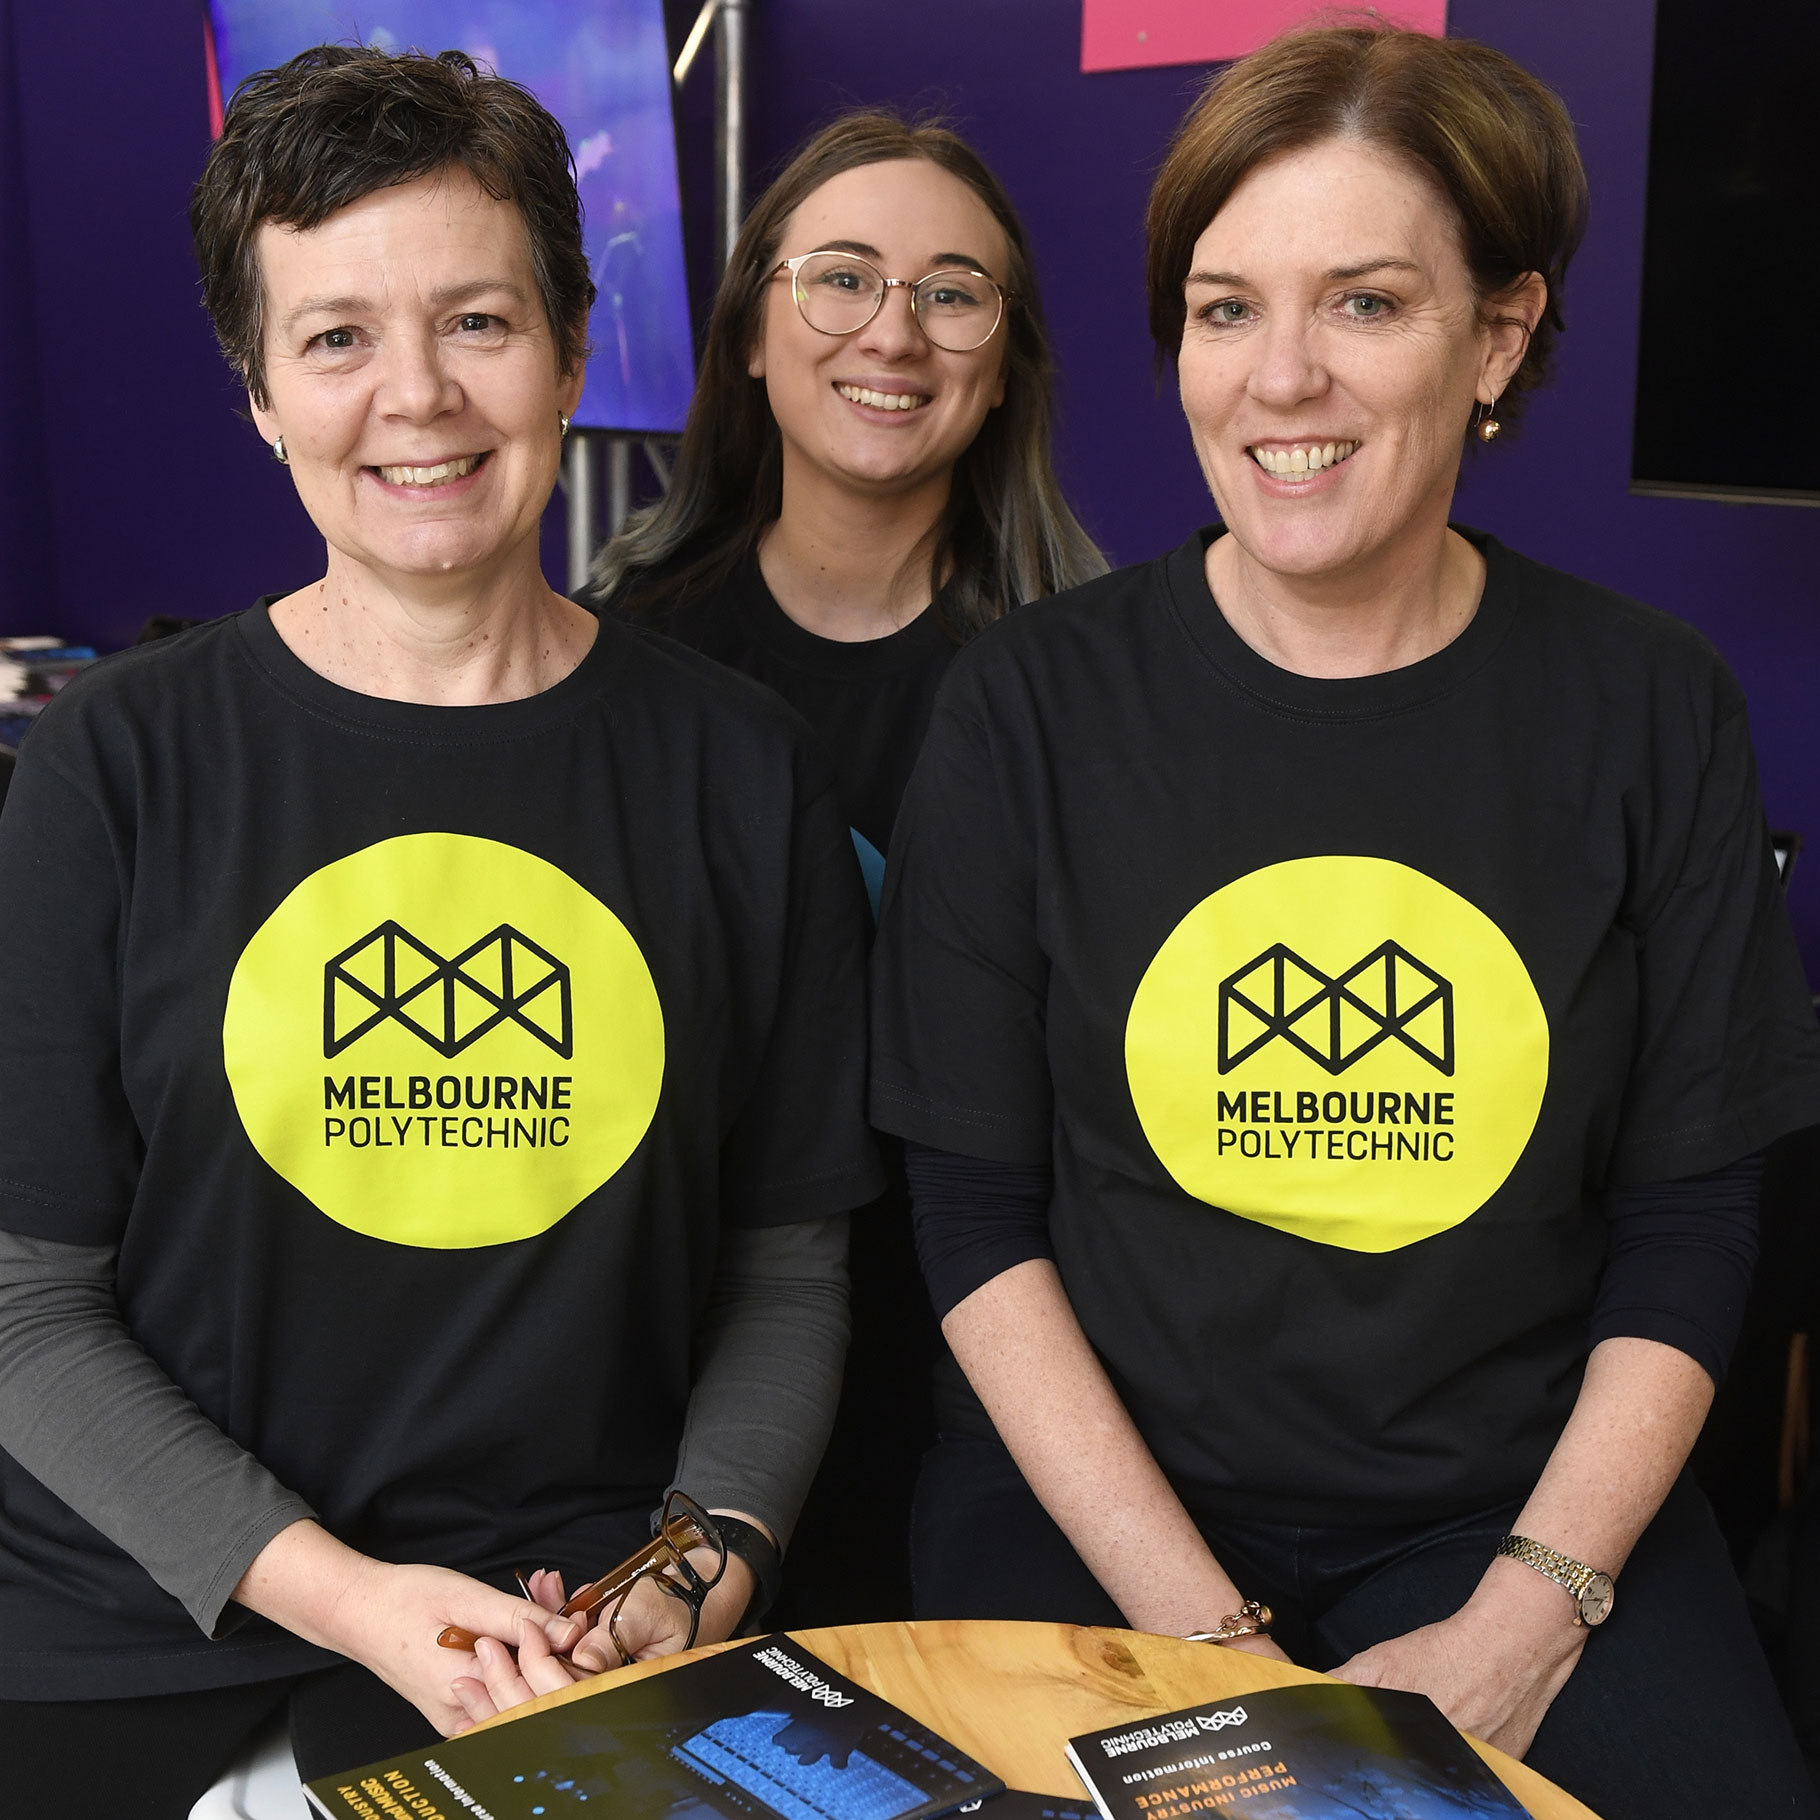 Three people smiling and wearing t-shirts with Melbourne Polytechnic logos 